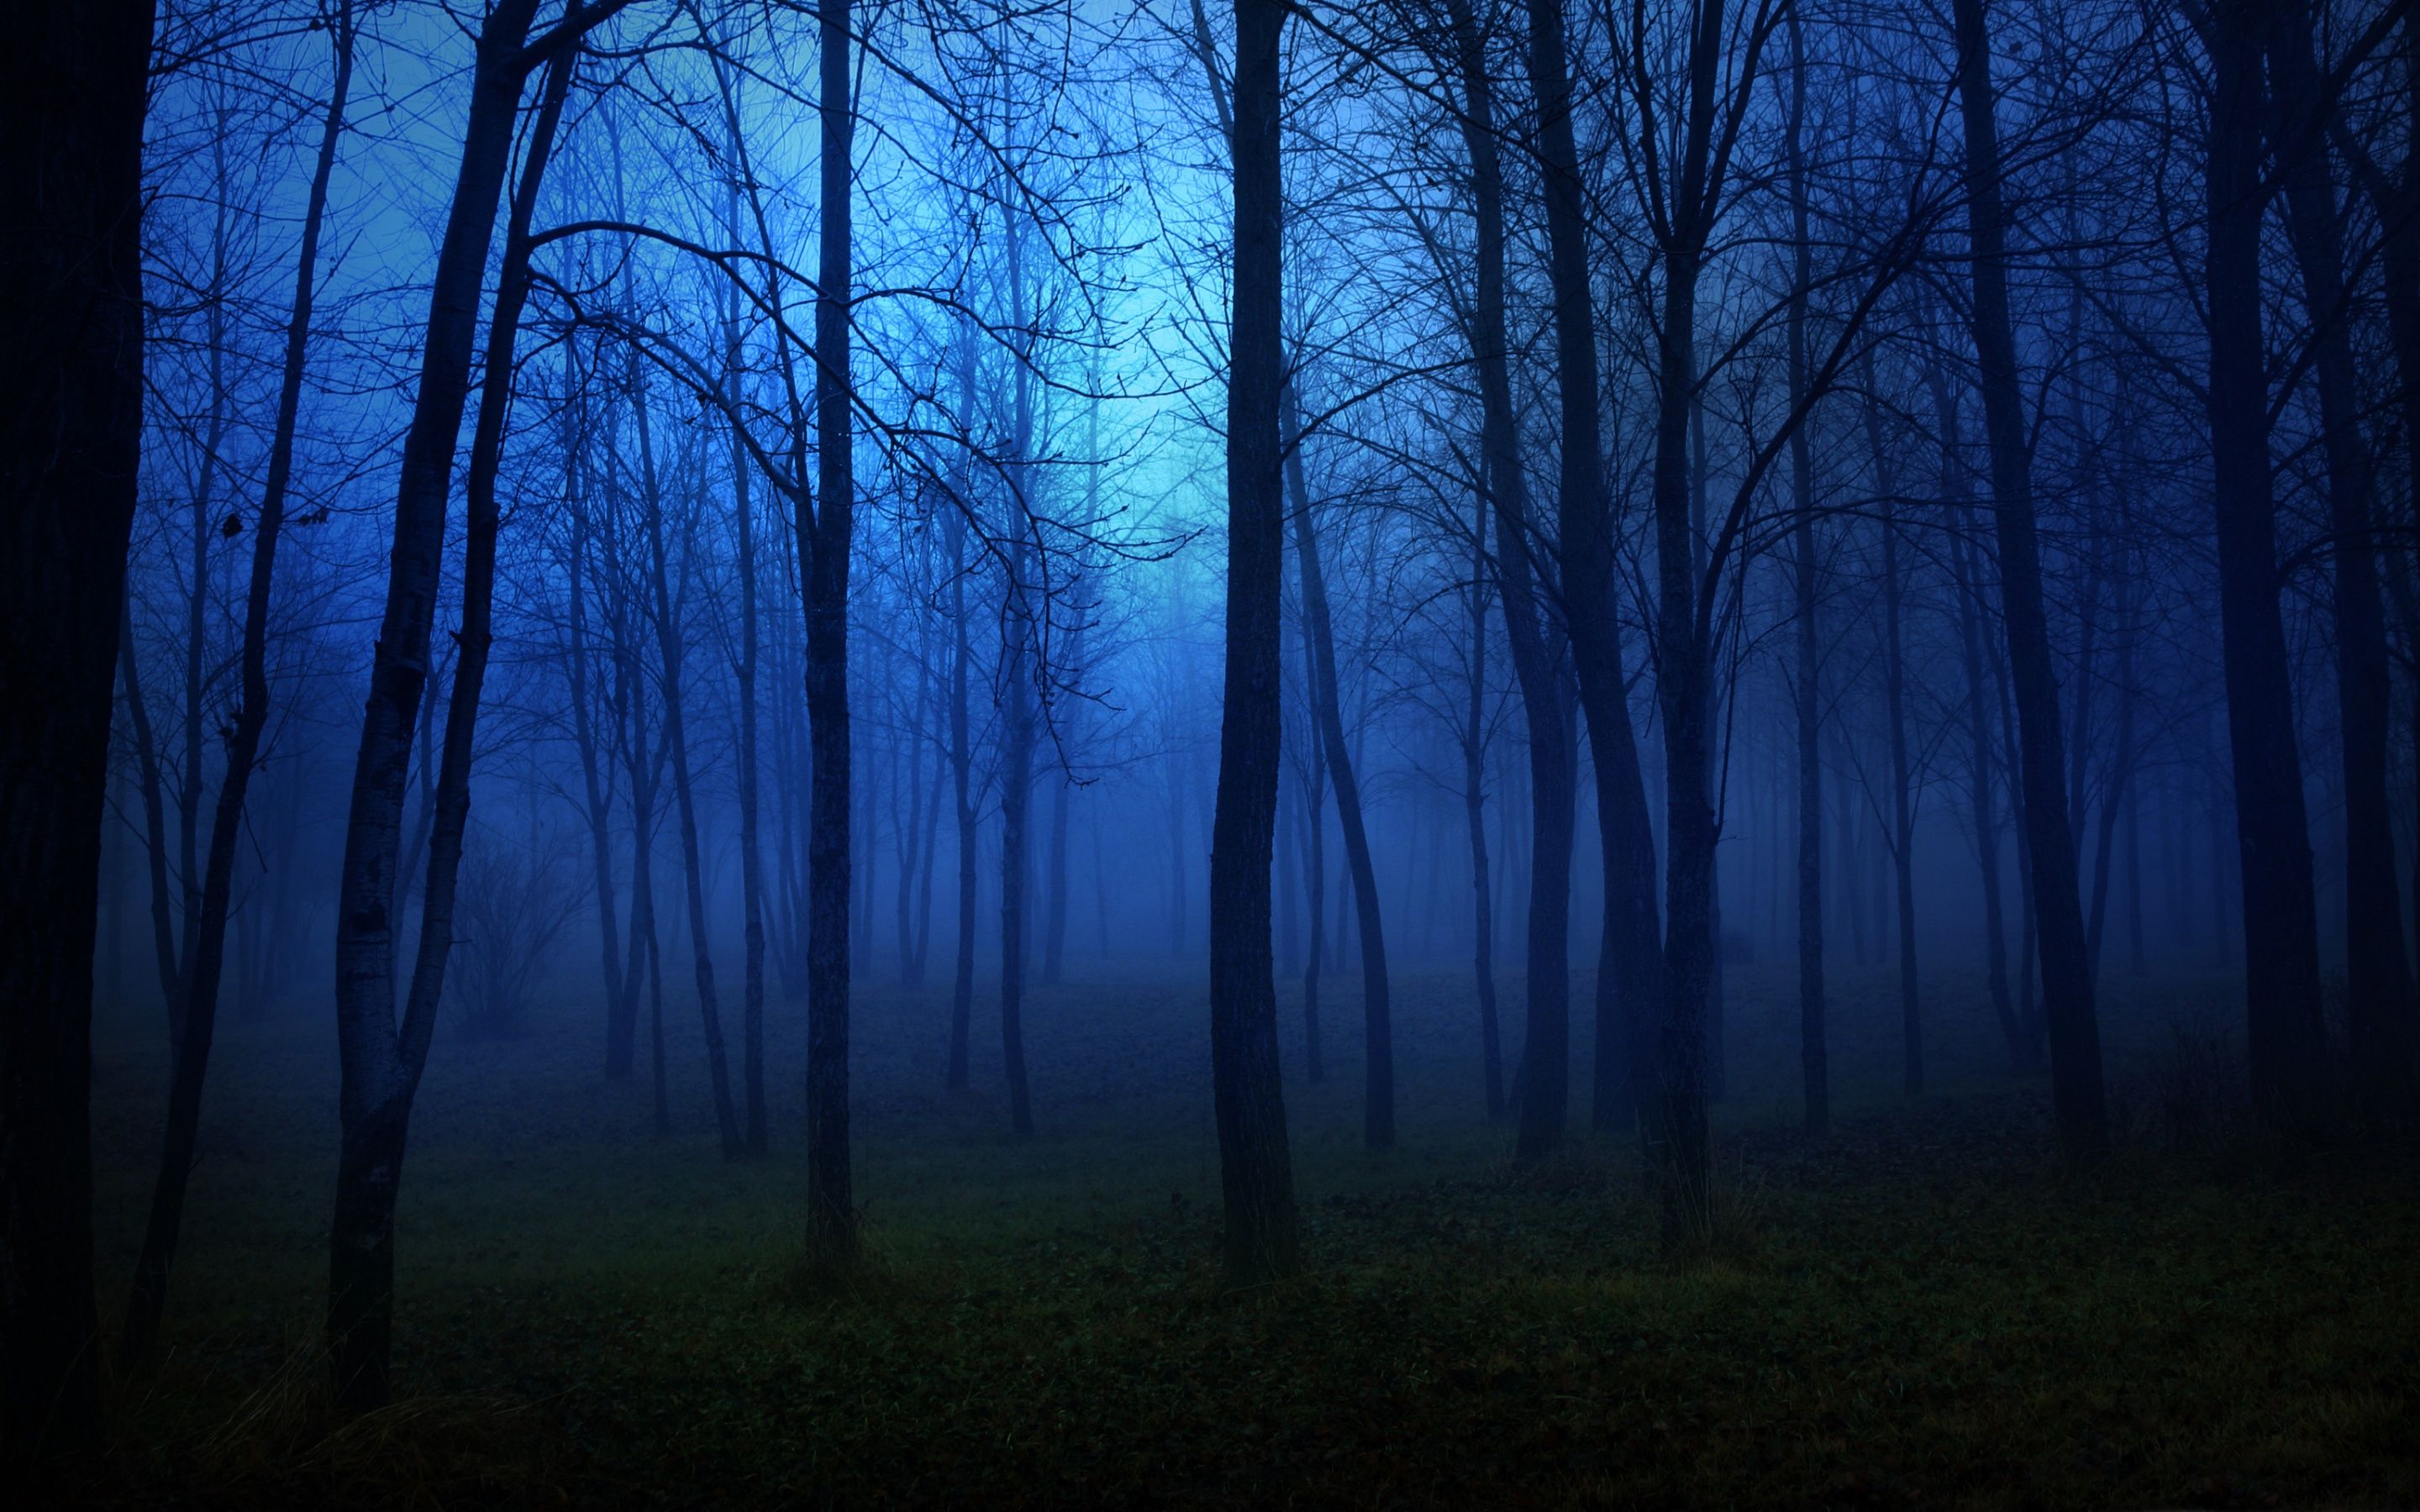 Night in the forest MacBook Air Wallpaper Download